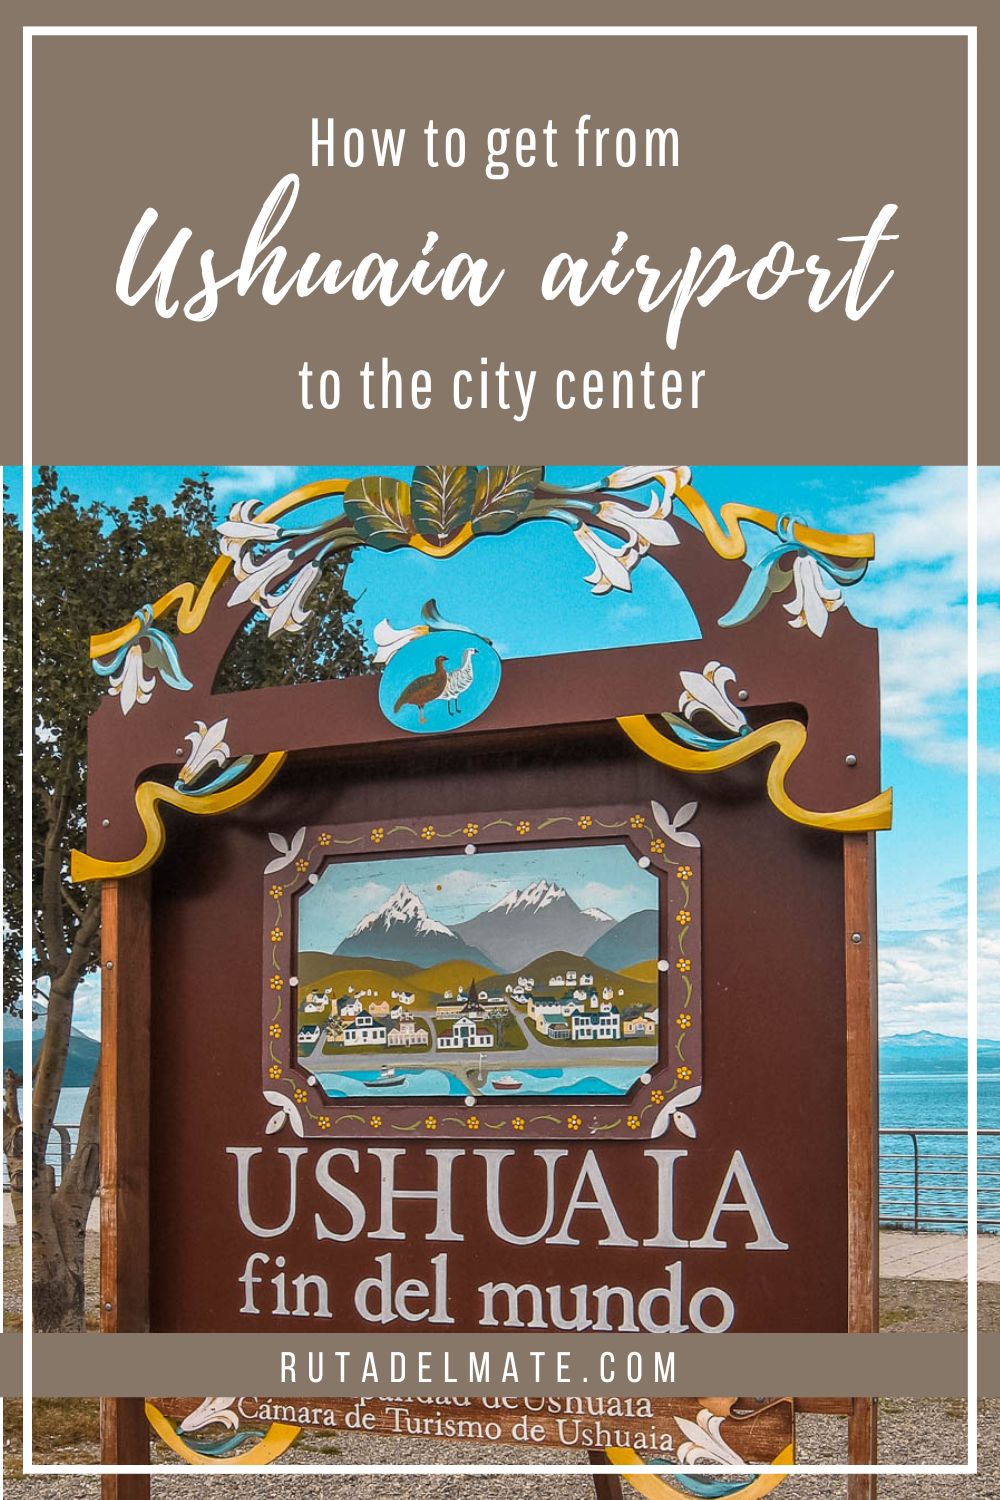 How to get from Ushuaia Airport to downtown